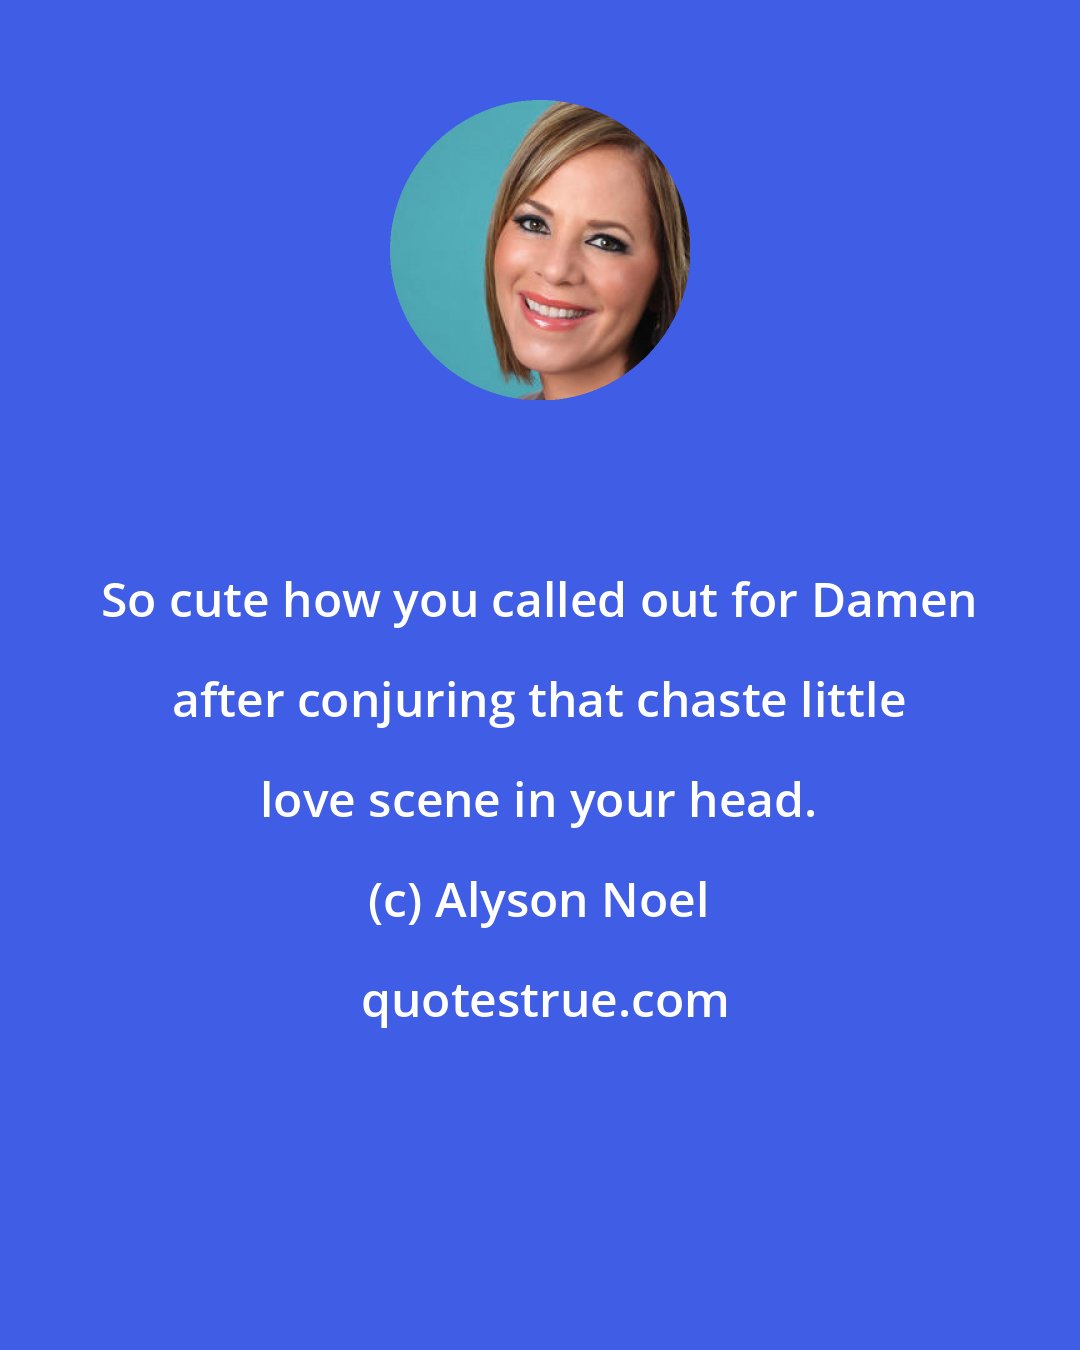 Alyson Noel: So cute how you called out for Damen after conjuring that chaste little love scene in your head.